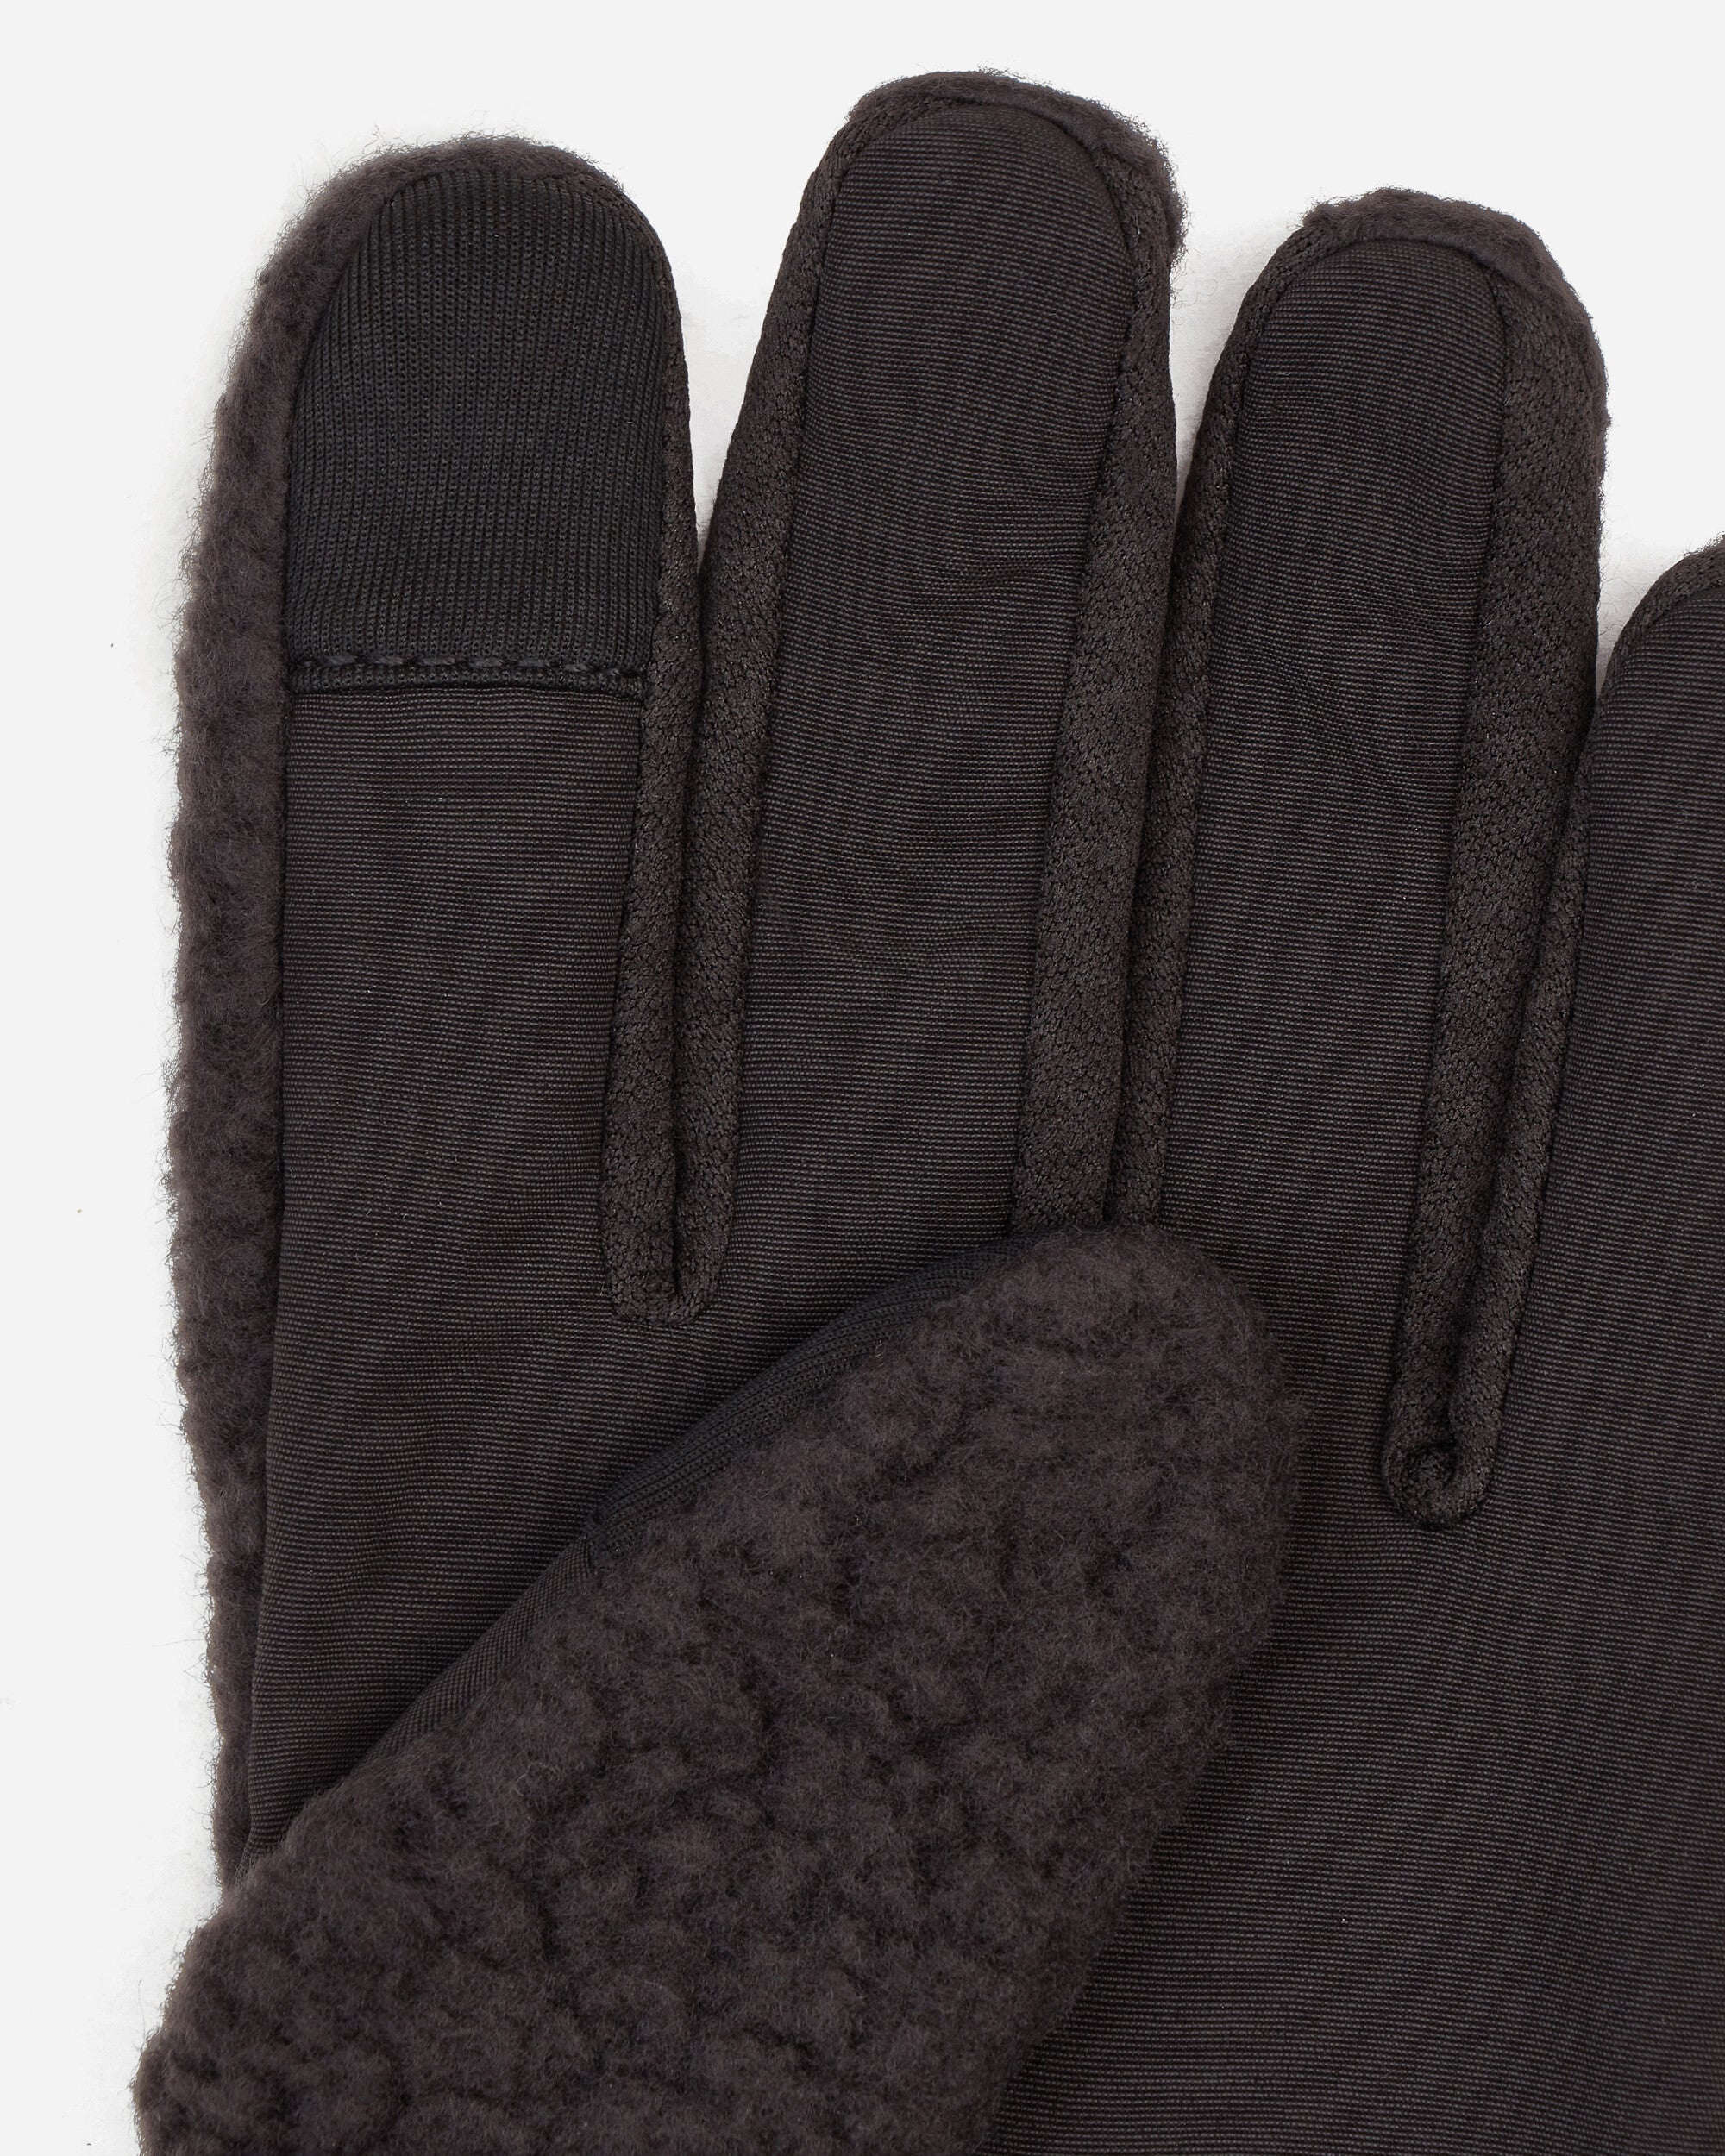 Patagonia Wmns Retro Pile Gloves Black Gloves and Scarves Gloves 34585 BLK